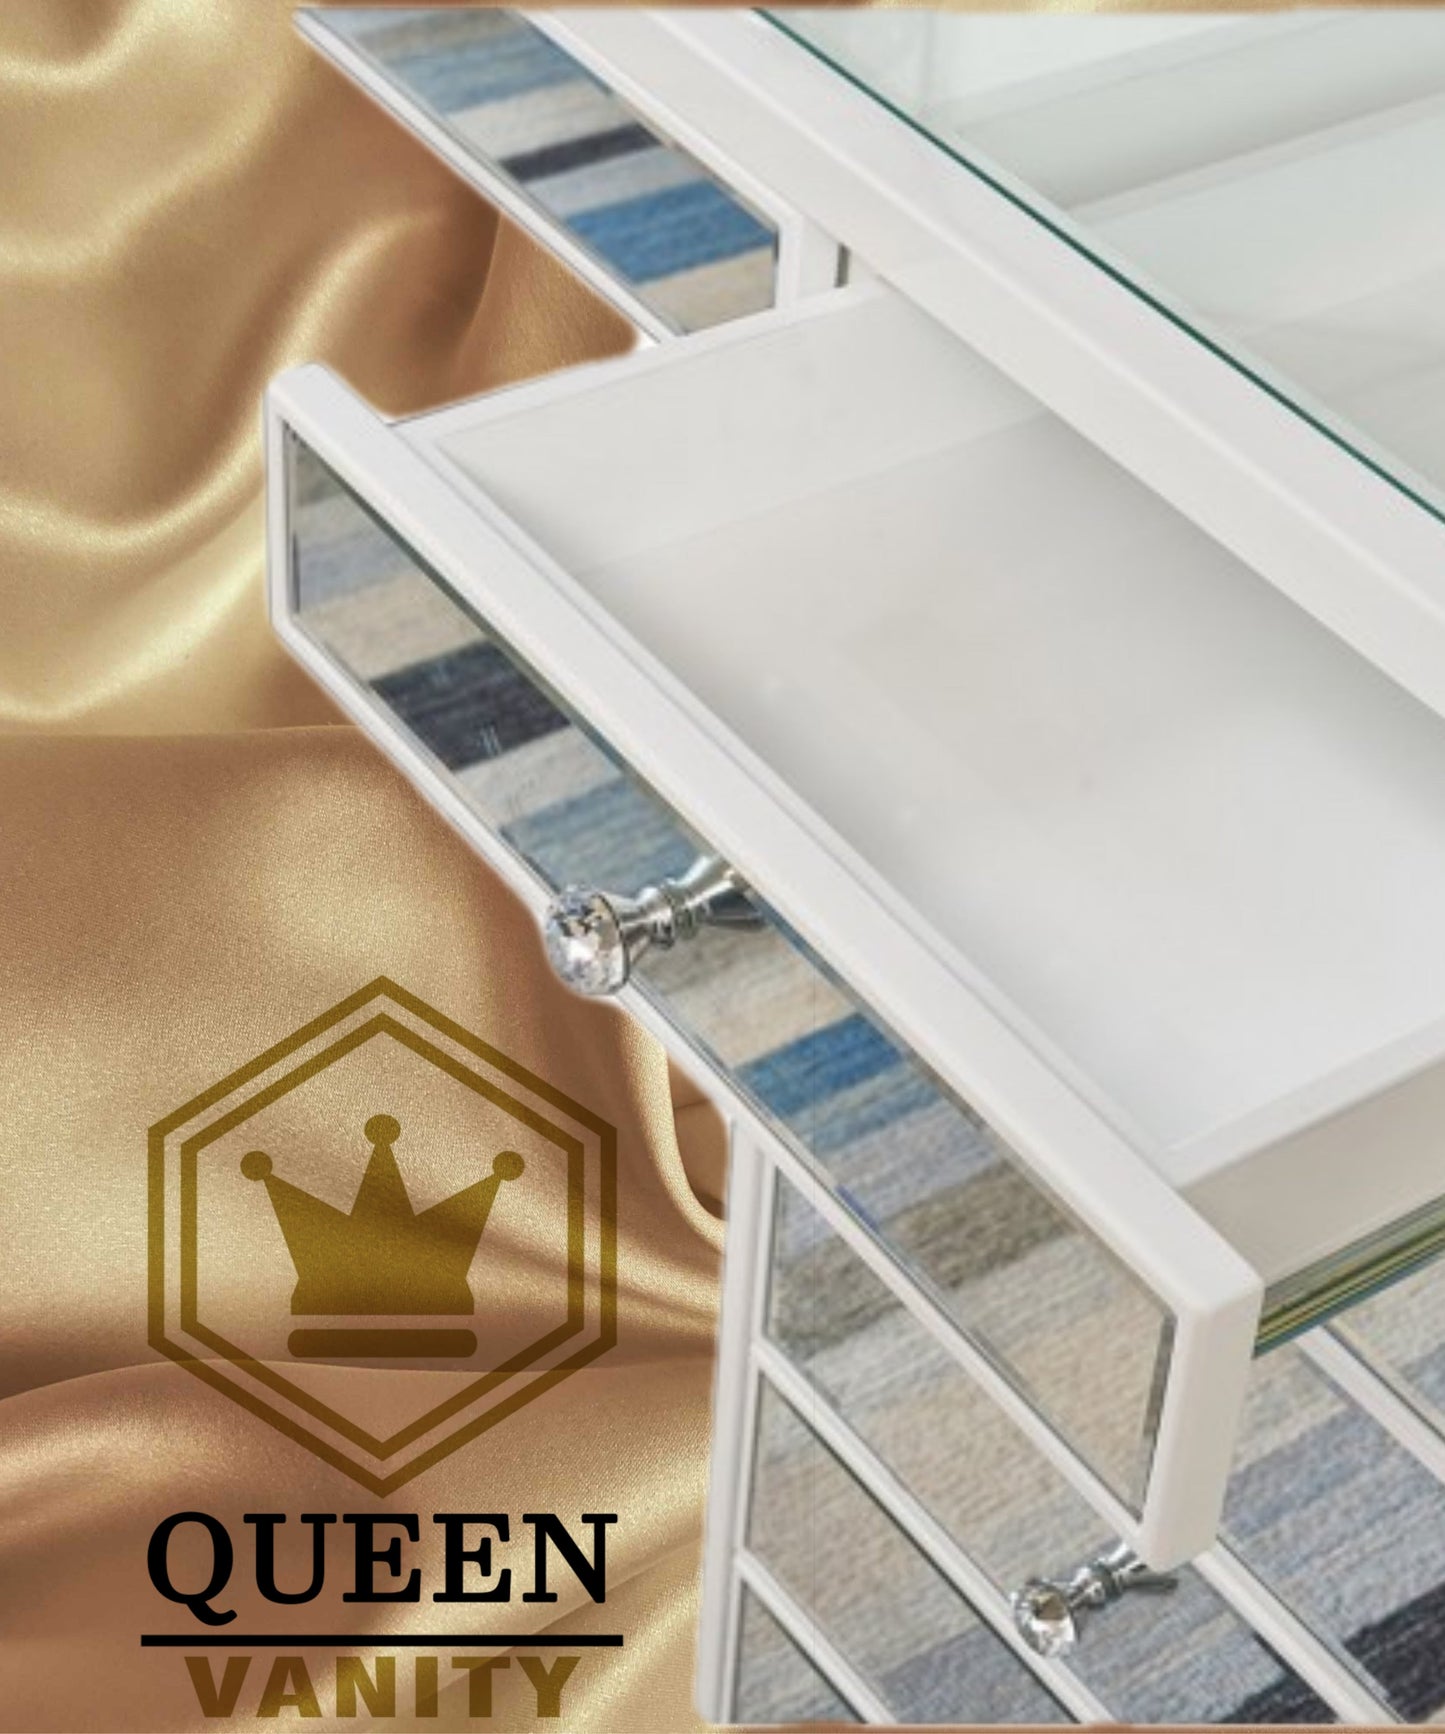 Sofia Mirrored Hollywood Makeup Vanity Station Queen Vanity Outlet 